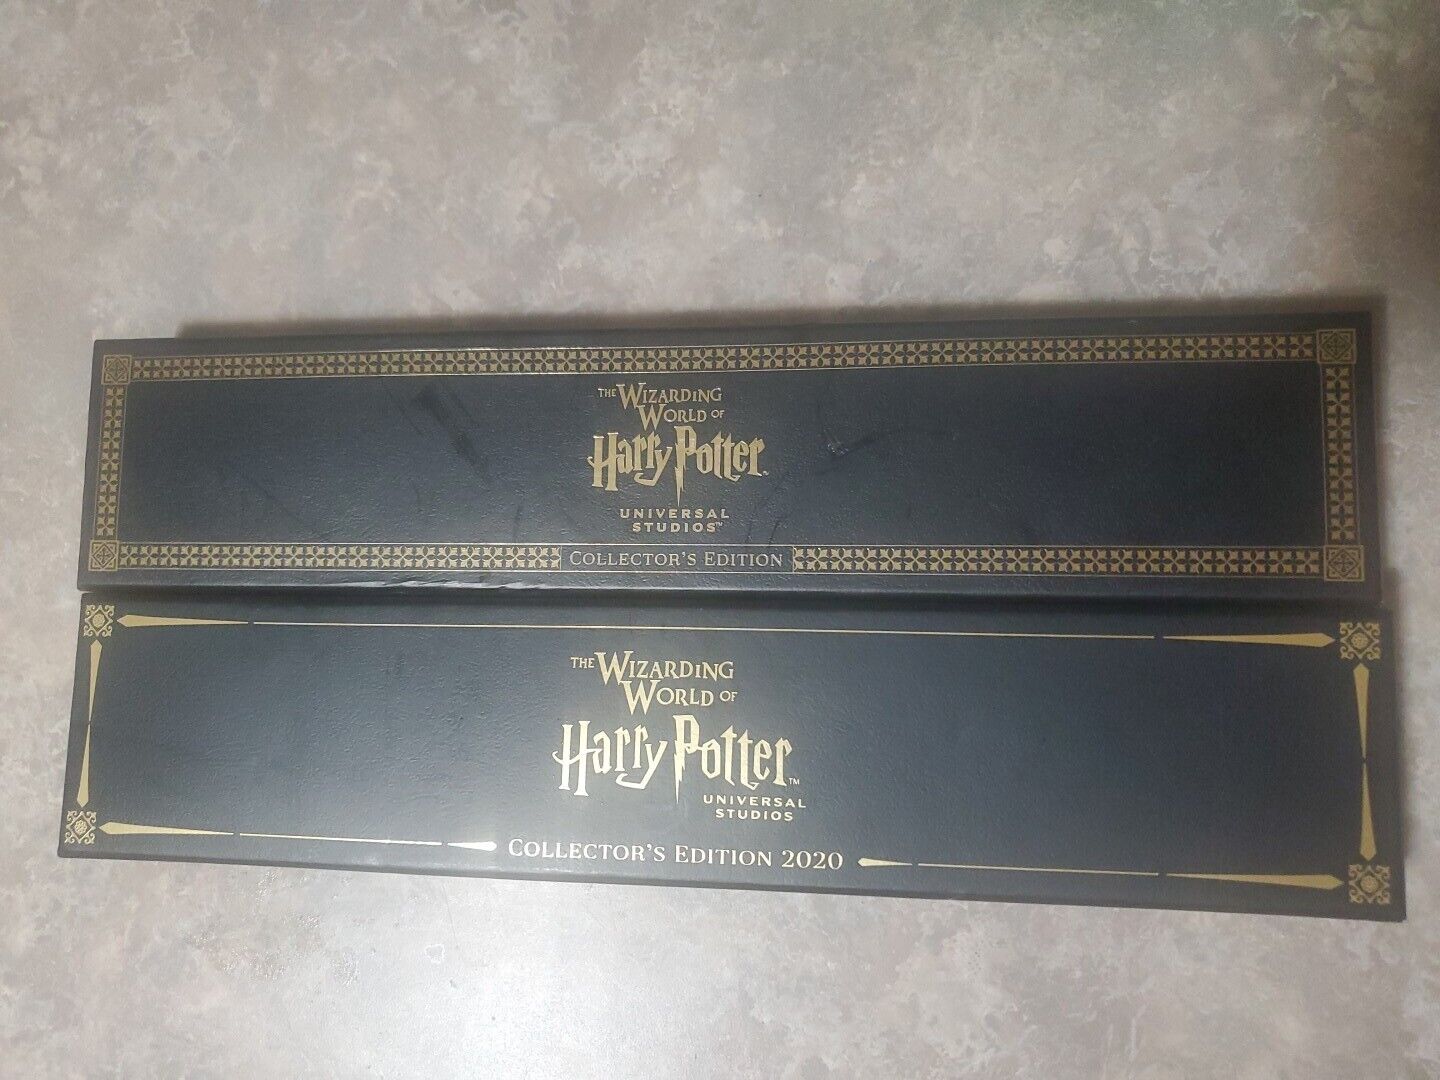 Wizarding world of harry potter wand 2019 & 2020 Collector's Edition